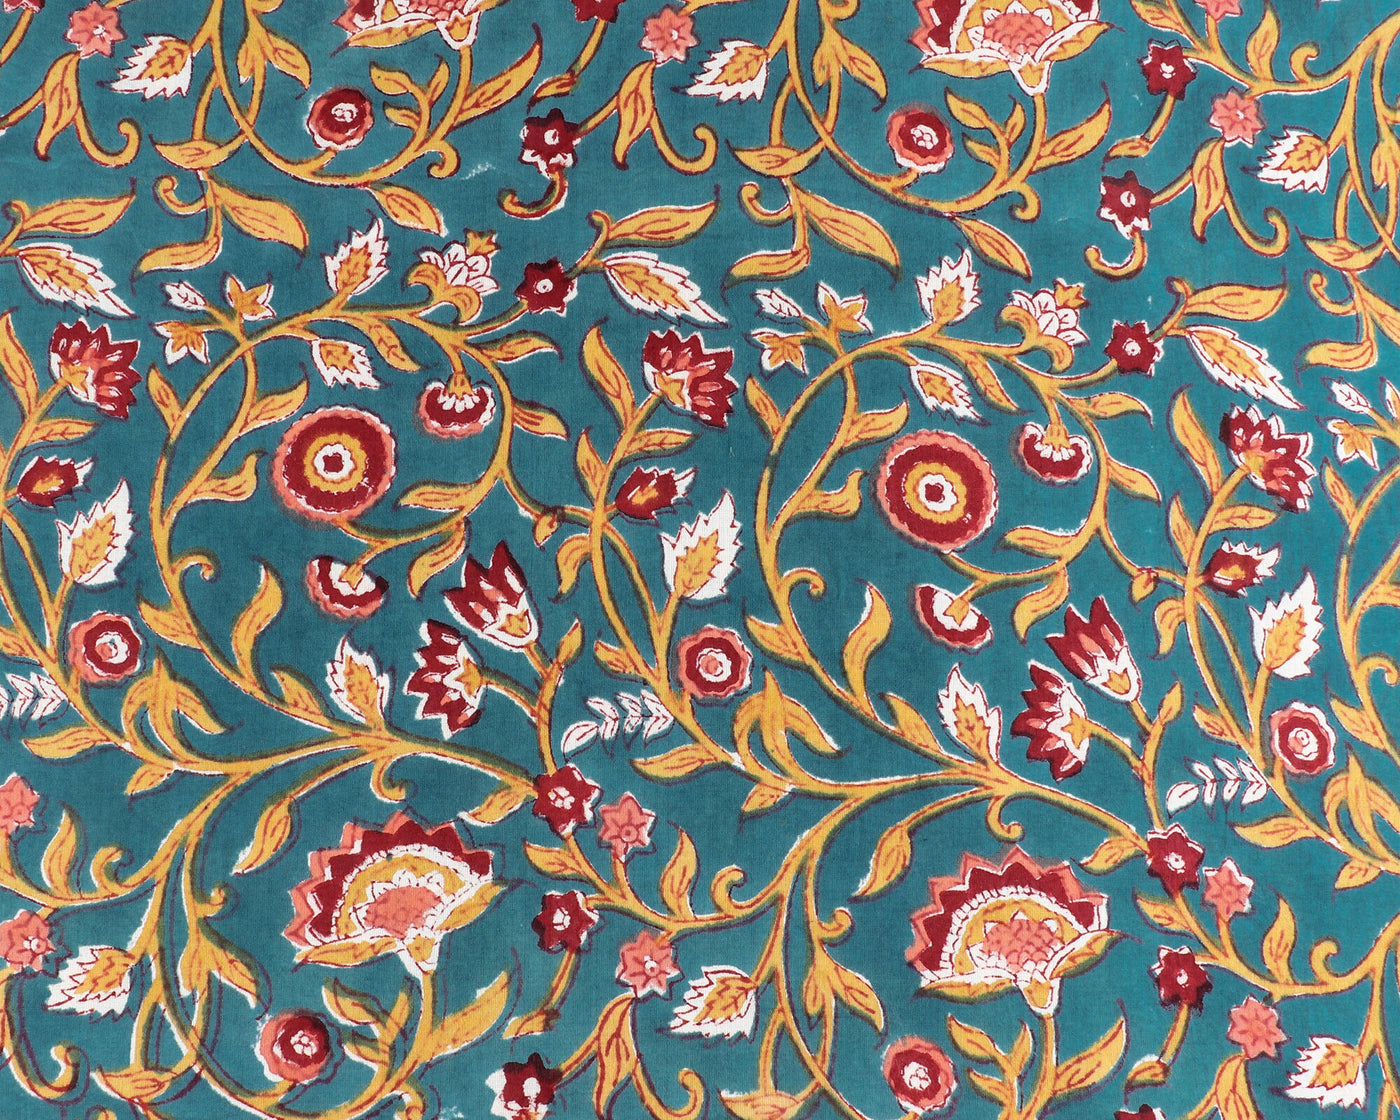 Turkish Blue, Dijon Yellow, Sangria Red India Floral Hand Block Printed 100% Pure Cotton Cloth, Fabric by the yard, Women's Clothing Curtain